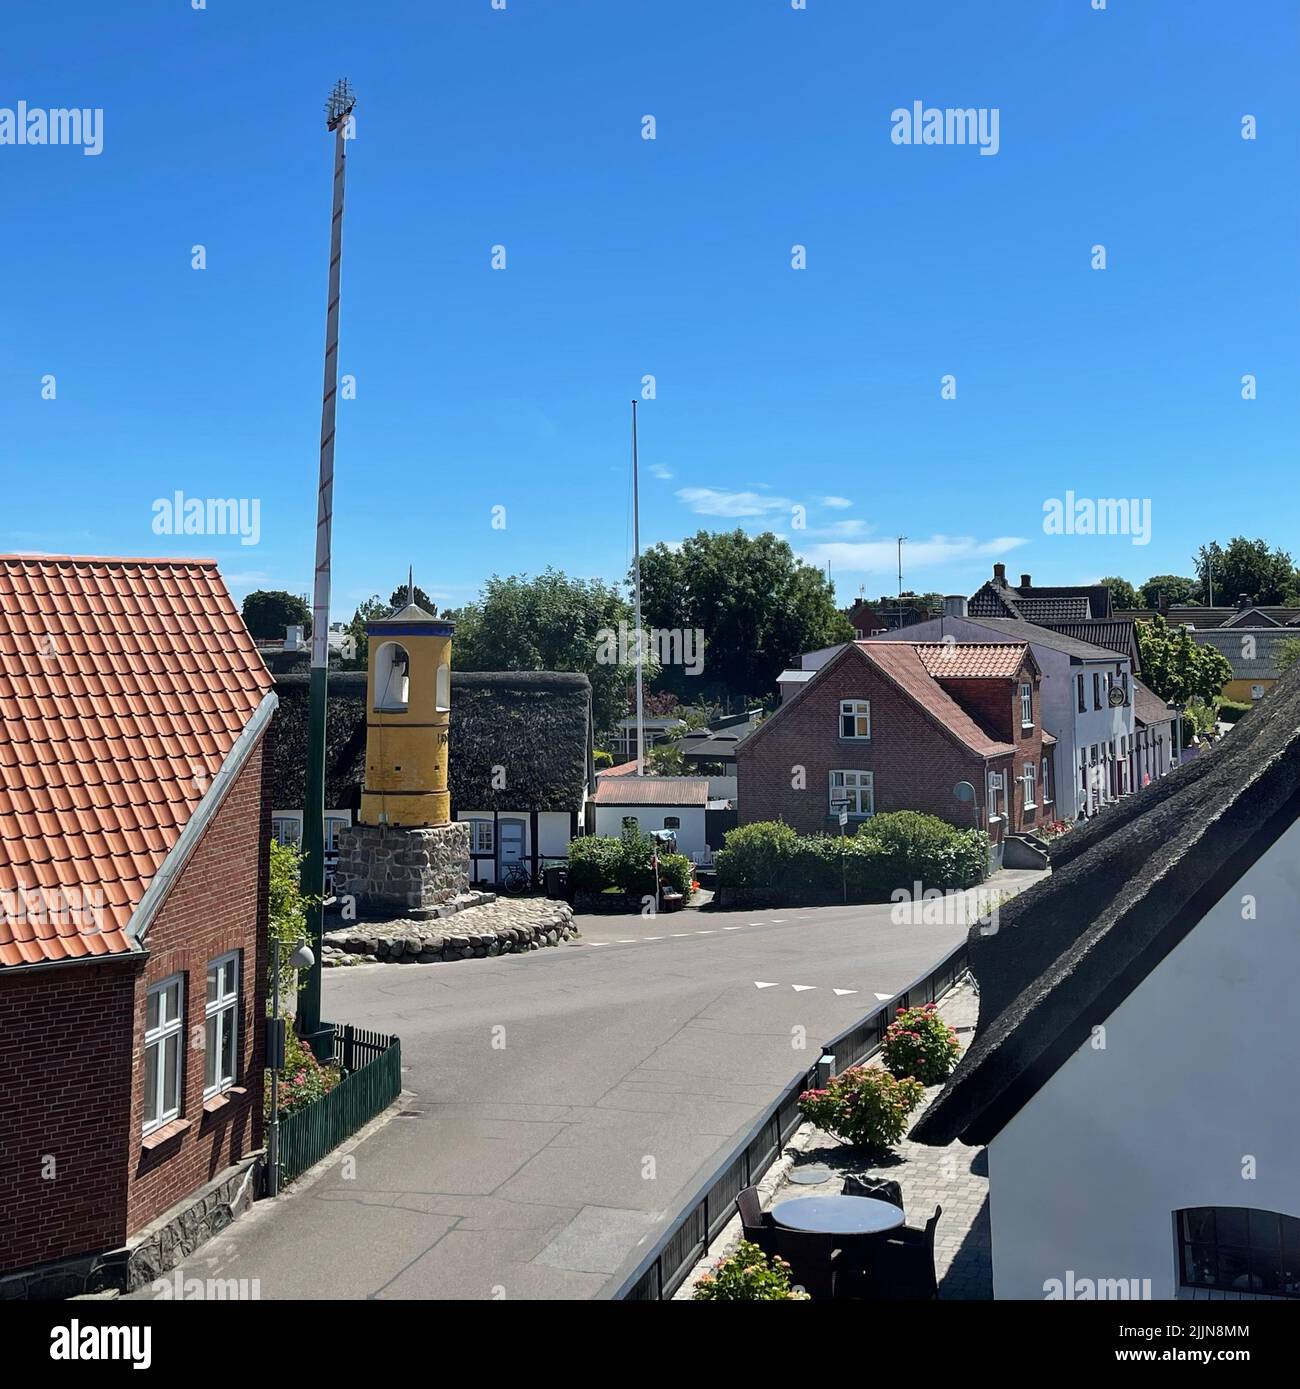 Villagescape with bell tower and maypole, Nordby, Samsoe, Jutland, Denmark Stock Photo